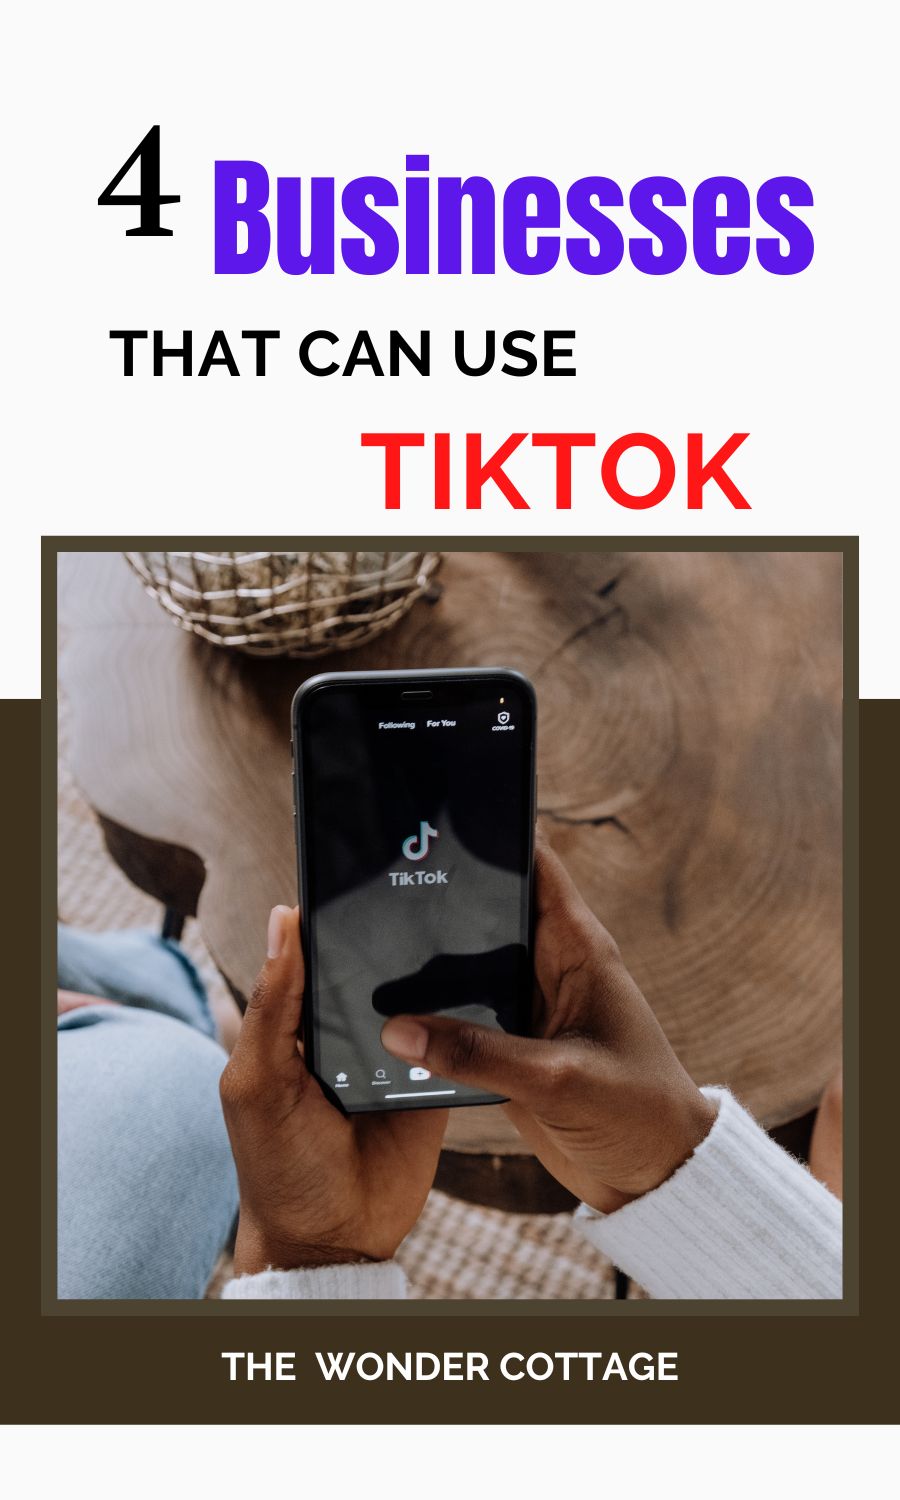 4 Businesses that can use TikTok